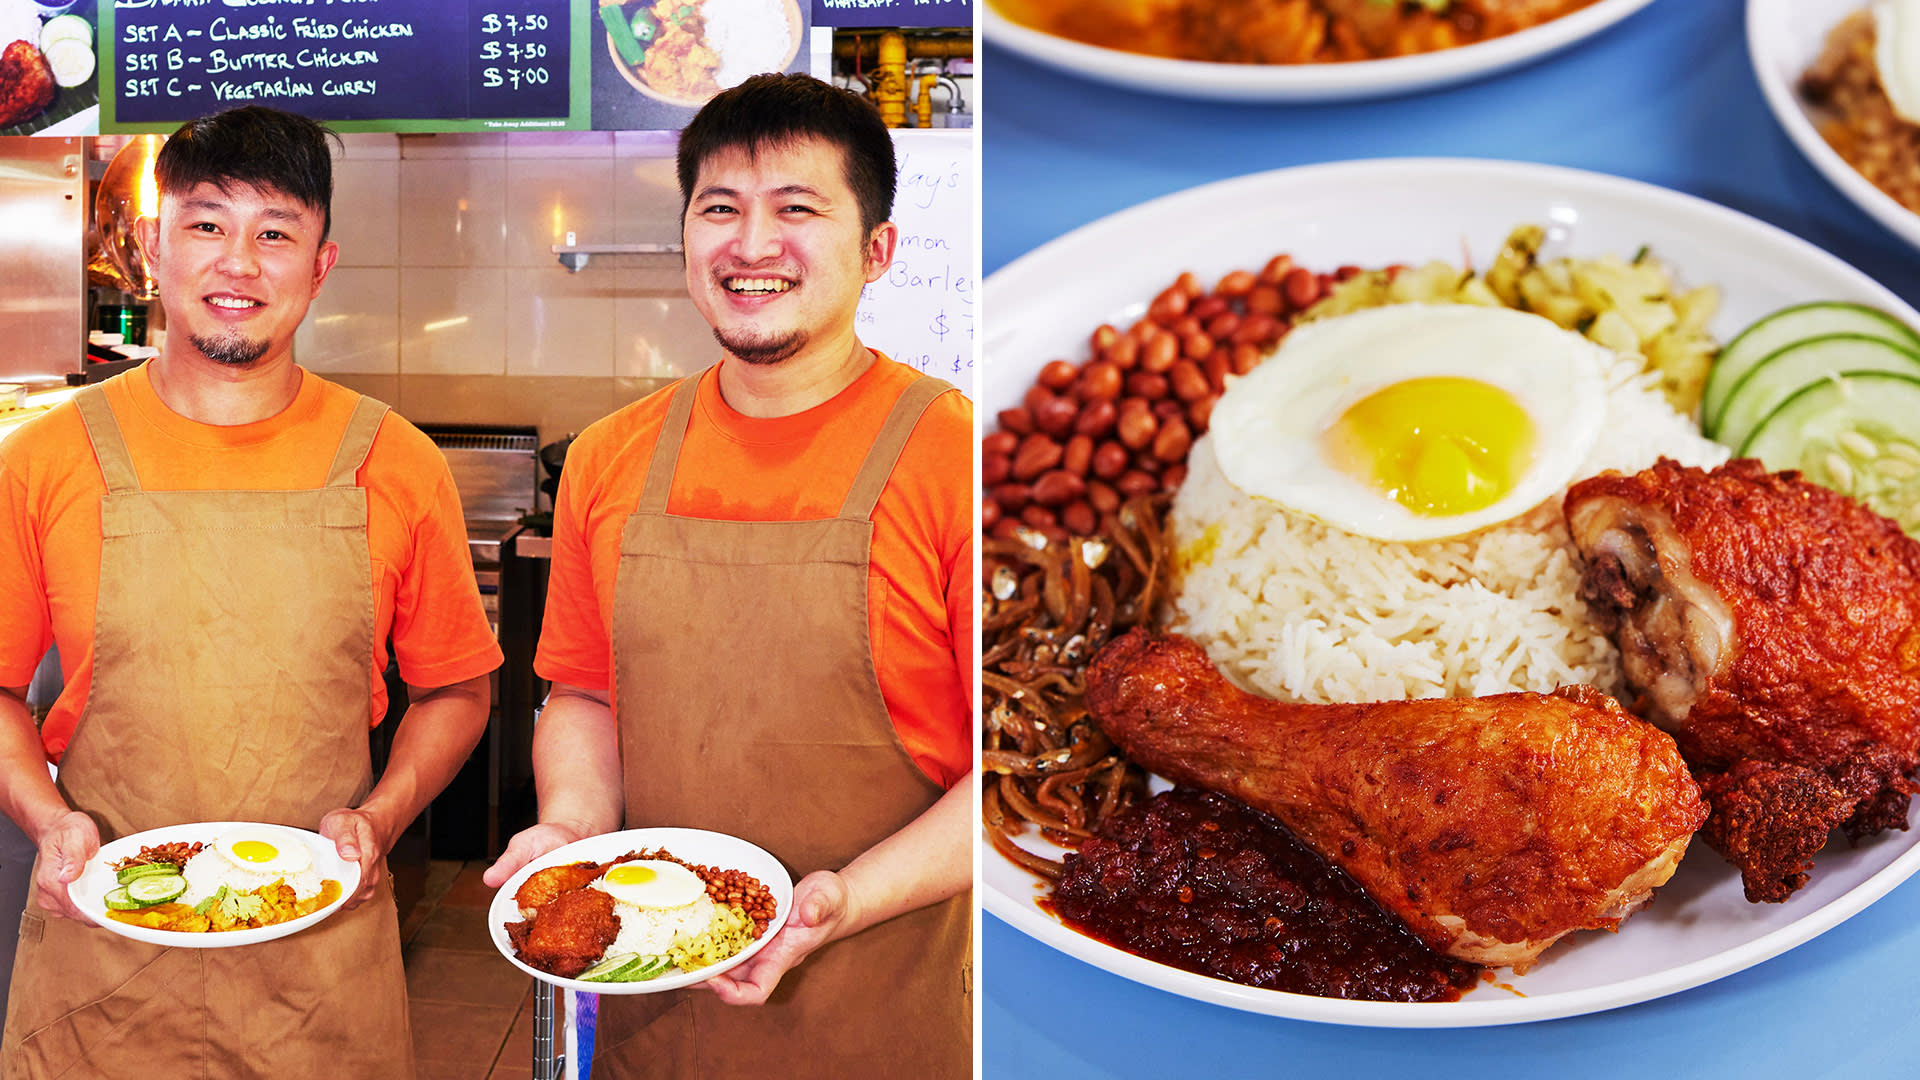 Bankers Sell Nasi Lemak Inspired By Granny’s Recipe At Amoy Street Food Centre